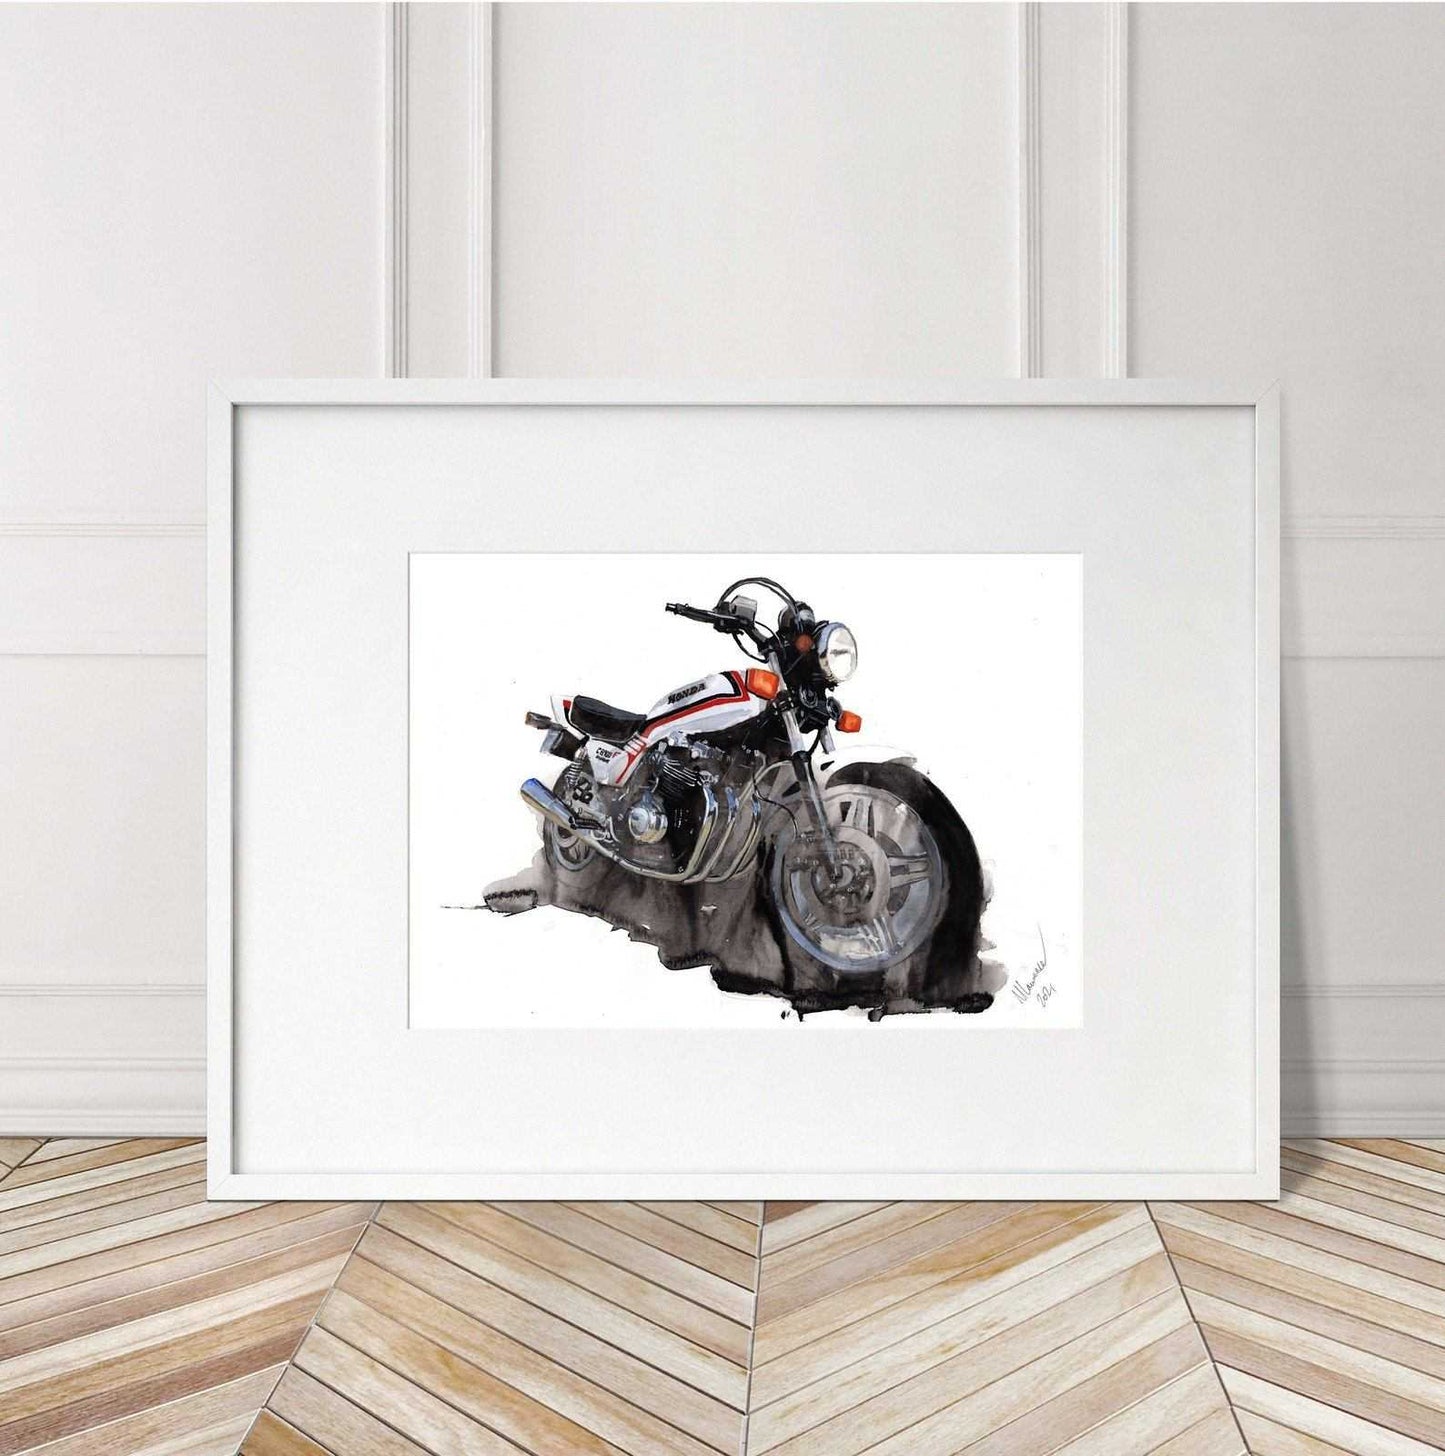 Painting of a Honda CB900f Classic Motorcycle Limited Print Motorcycle Bike ArtbyMyleslaurence